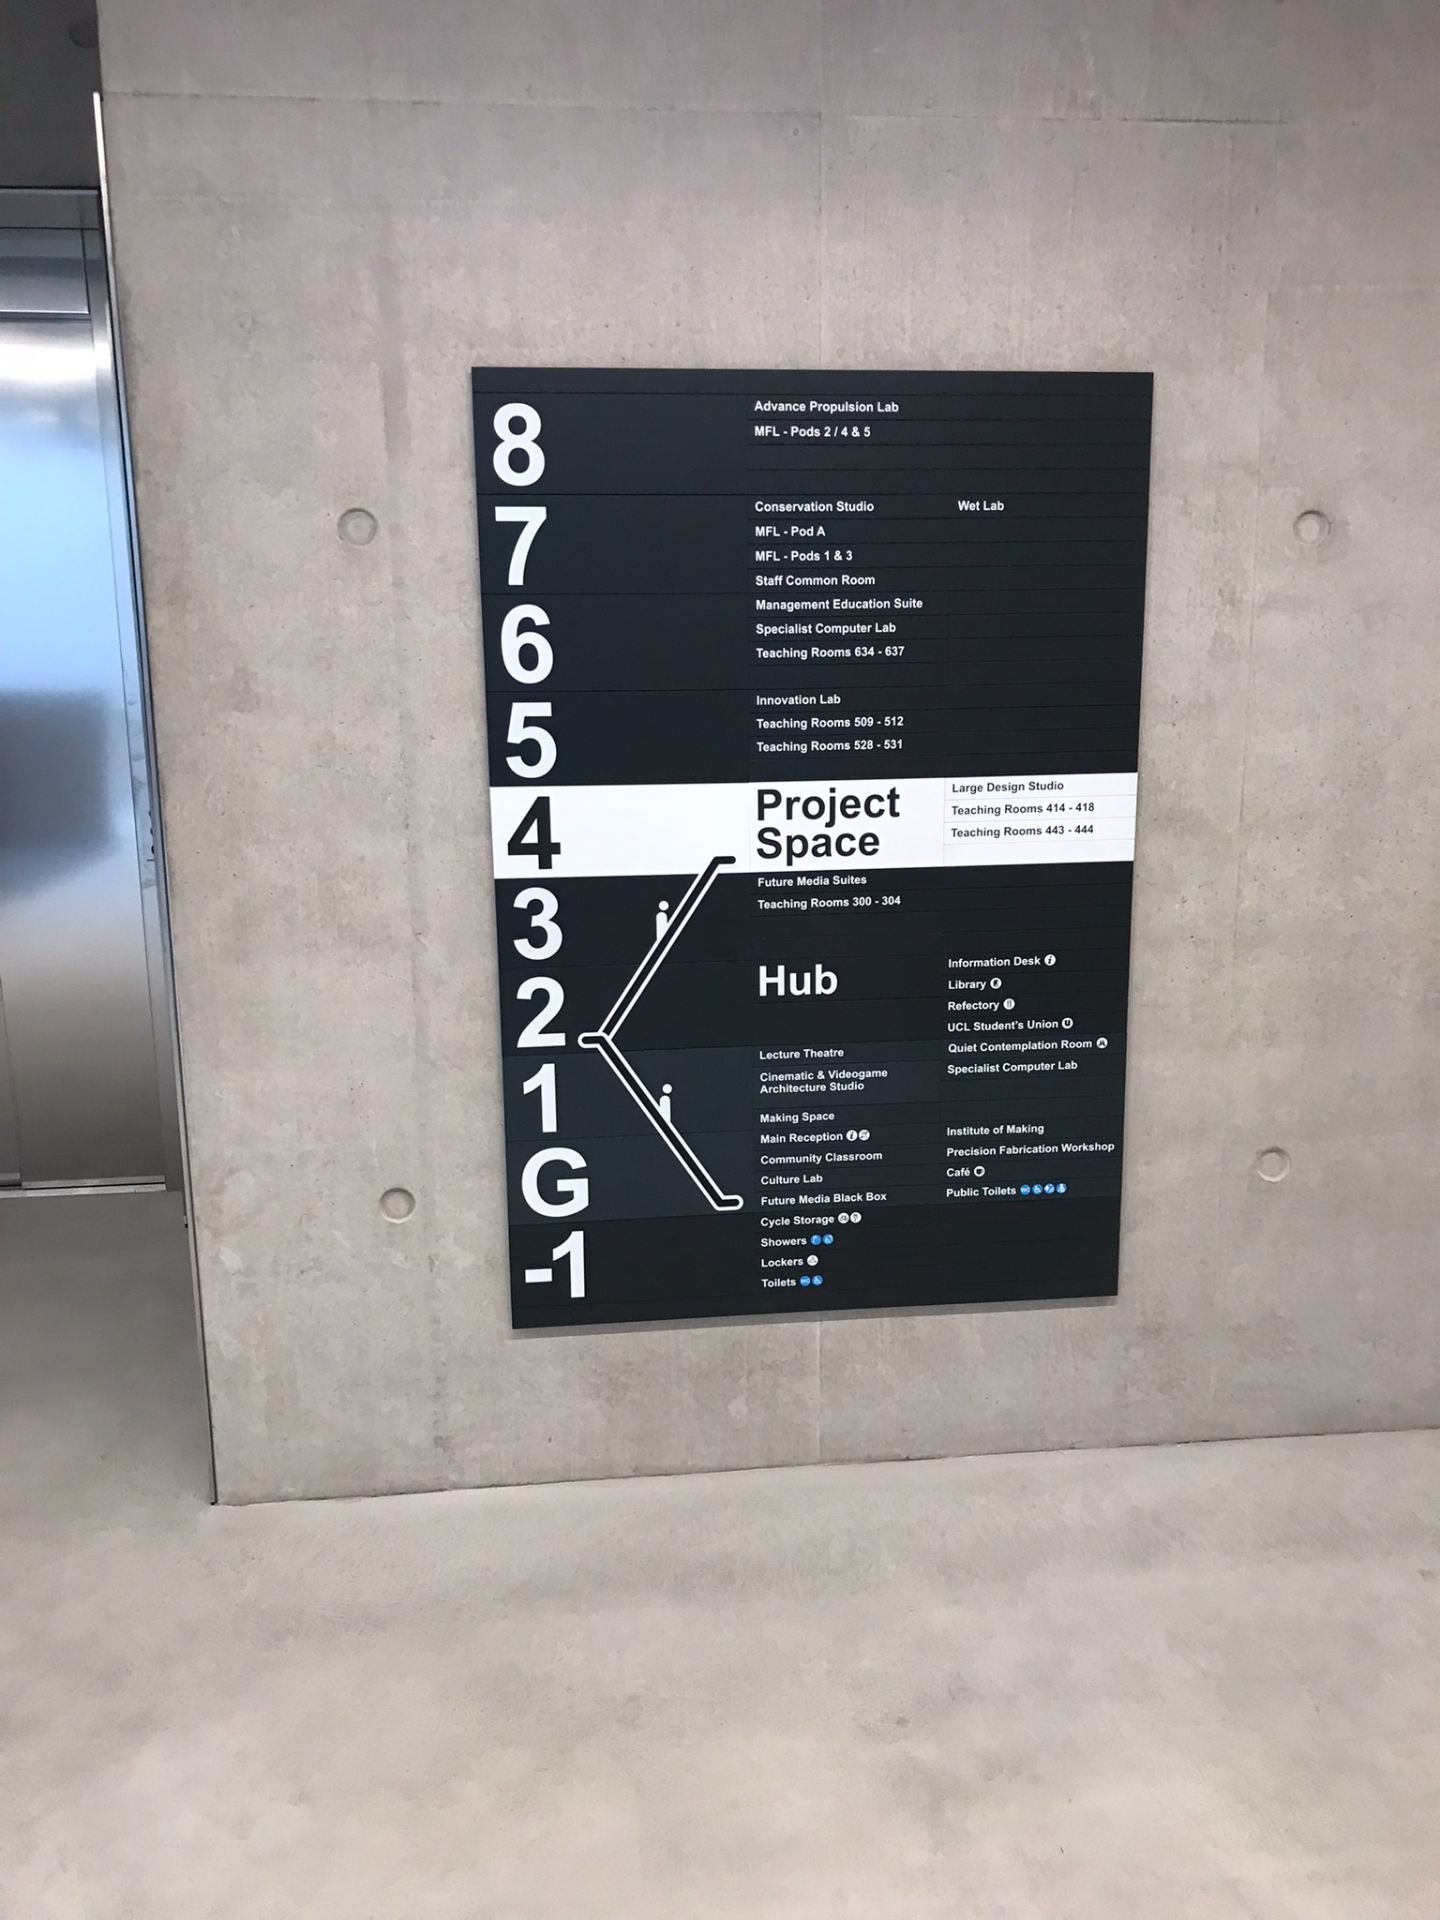 Directory sign showing the different academic spaces within the building, floors -1 to 8. At the centre of the sign are pictograms of 2 large escalators connecting the Hub on Level 2 to the ground floor and Level 4 Project Space